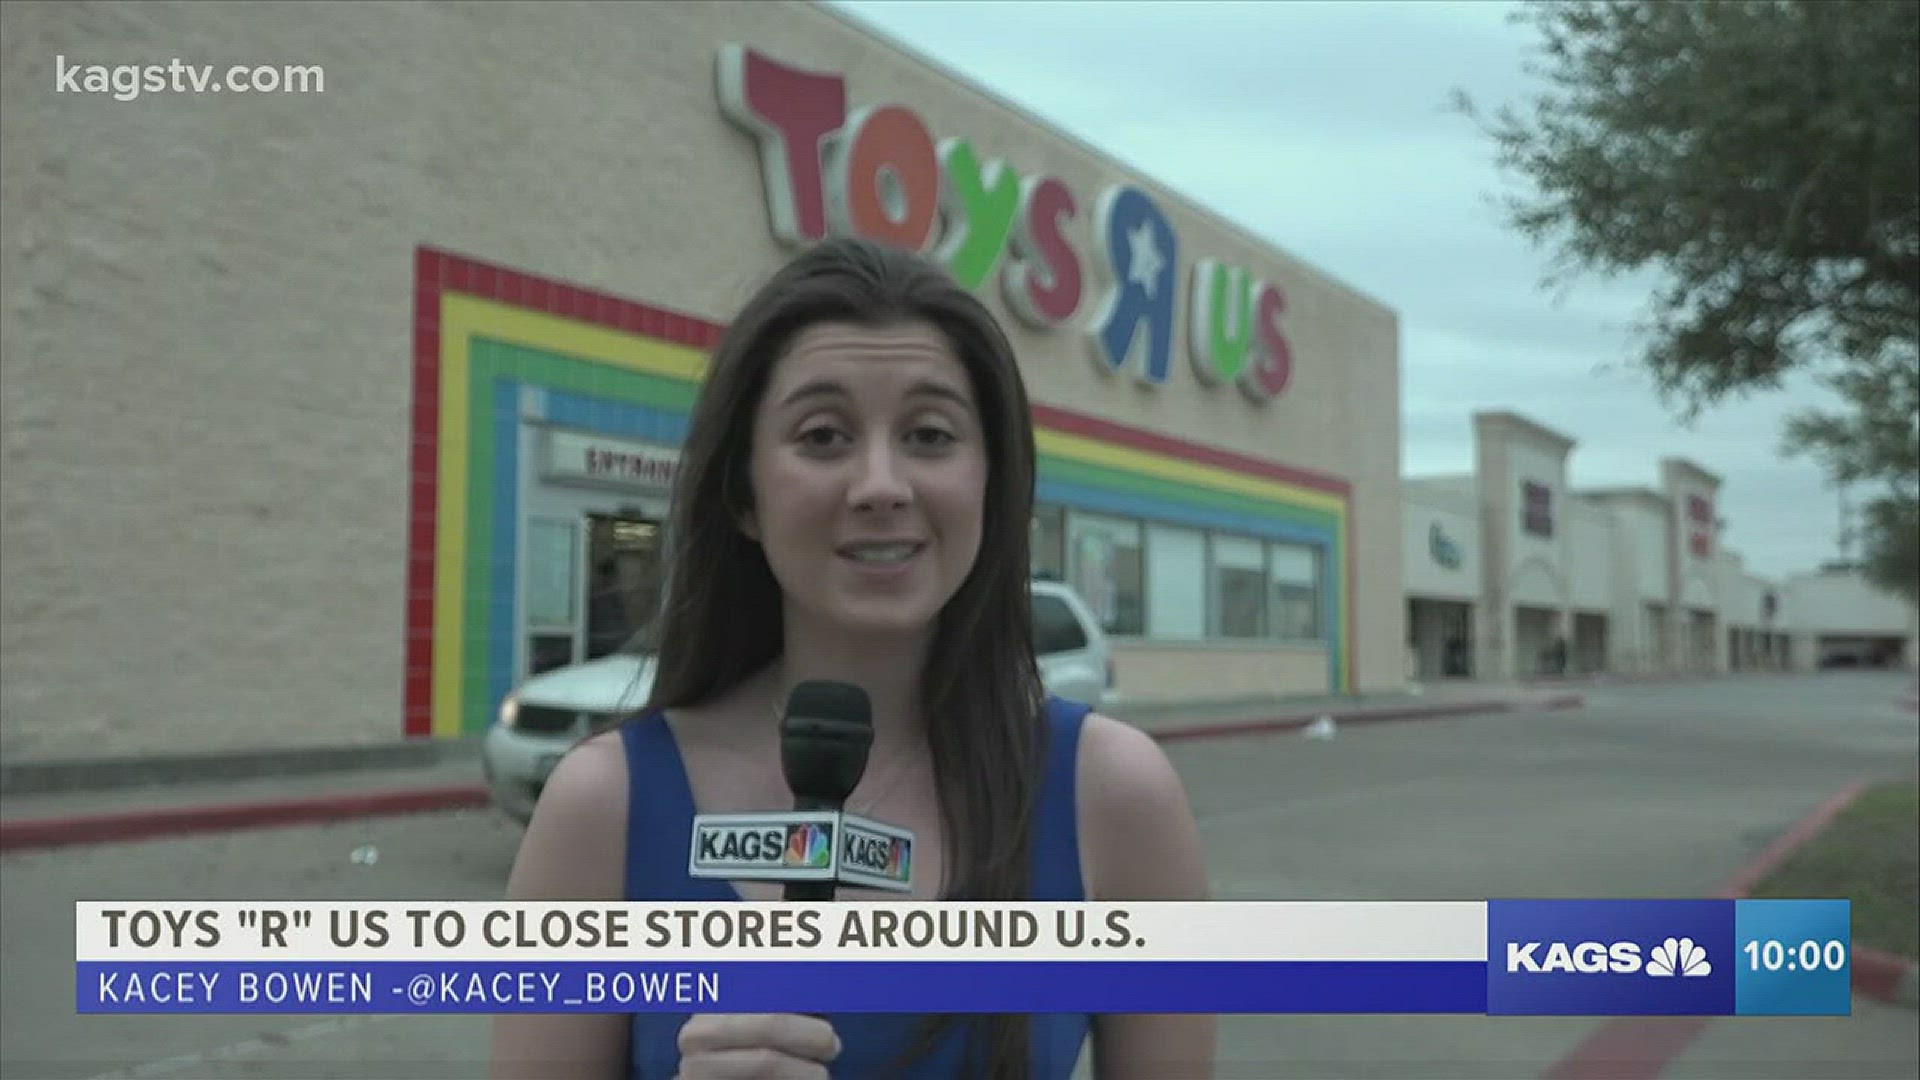 KAGS Kacey Bowen got reaction from College Station shoppers after Toys 'R' Us announced the company will be closing its U.S. stores